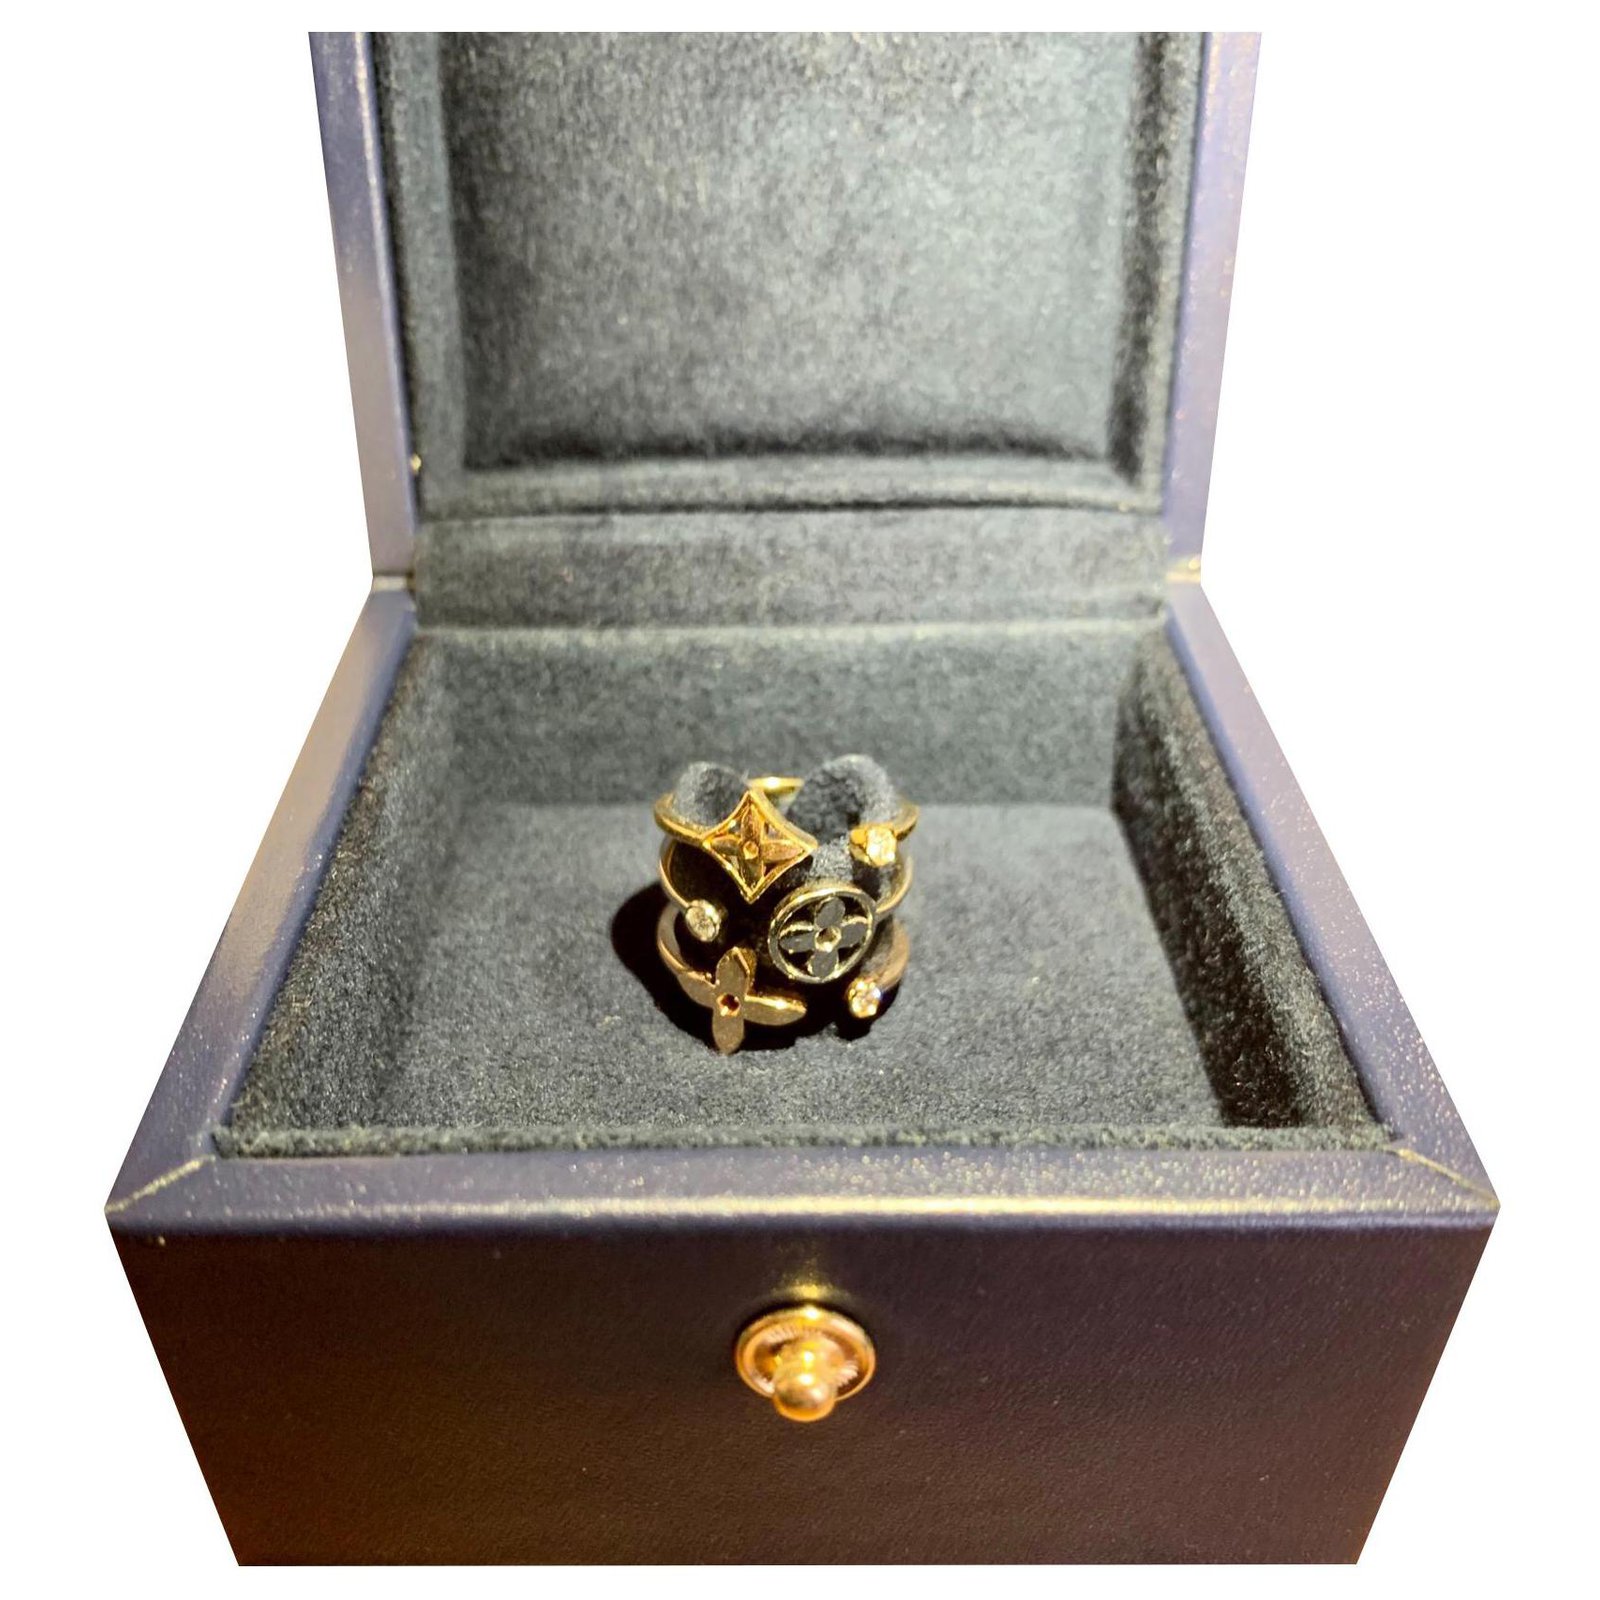 Idylle Blossom ring, 3 golds and diamonds - Jewelry - Categories